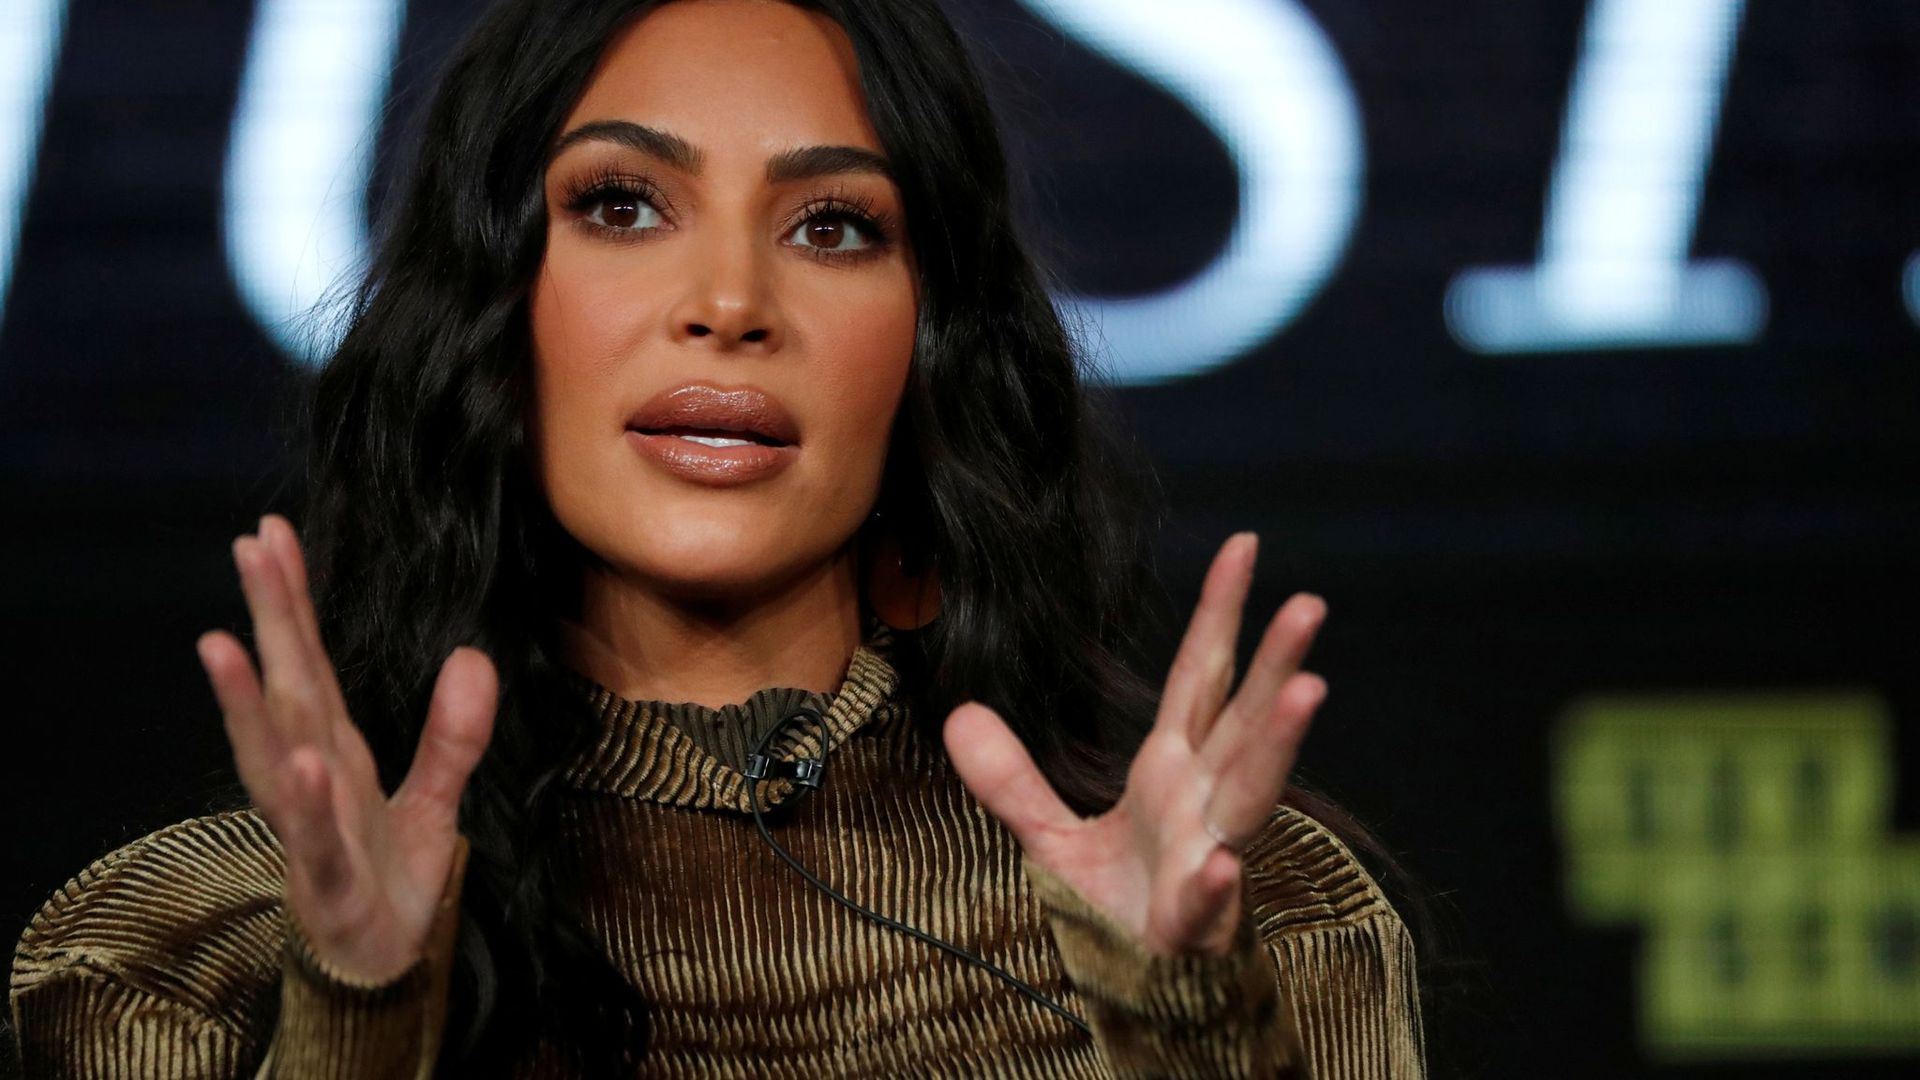 Kim Kardashian crypto post: The celebrity promoted EthereumMax and got into federal trouble